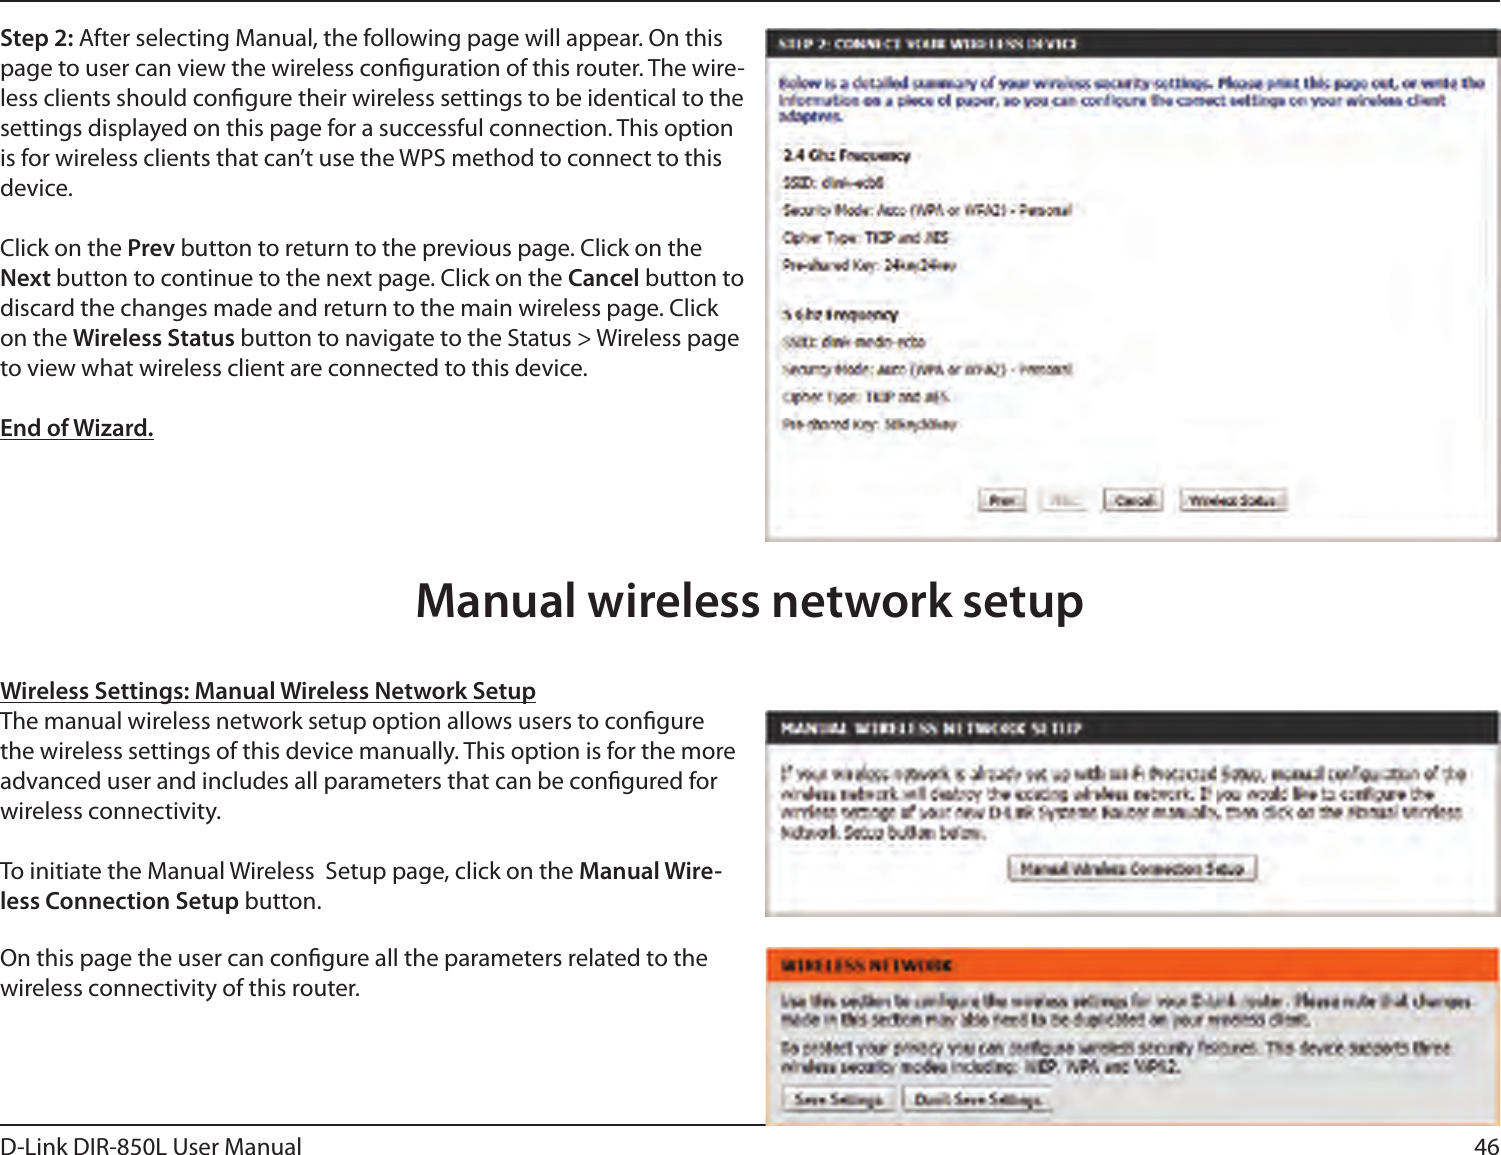 46D-Link DIR-850L User ManualStep 2: After selecting Manual, the following page will appear. On this page to user can view the wireless conguration of this router. The wire-less clients should congure their wireless settings to be identical to the settings displayed on this page for a successful connection. This option is for wireless clients that can’t use the WPS method to connect to this device.Click on the Prev button to return to the previous page. Click on the Next button to continue to the next page. Click on the Cancel button to discard the changes made and return to the main wireless page. Click on the Wireless Status button to navigate to the Status &gt; Wireless page to view what wireless client are connected to this device.End of Wizard.Wireless Settings: Manual Wireless Network SetupThe manual wireless network setup option allows users to congure the wireless settings of this device manually. This option is for the more advanced user and includes all parameters that can be congured for wireless connectivity.To initiate the Manual Wireless  Setup page, click on the Manual Wire-less Connection Setup button.On this page the user can congure all the parameters related to the wireless connectivity of this router.Manual wireless network setup